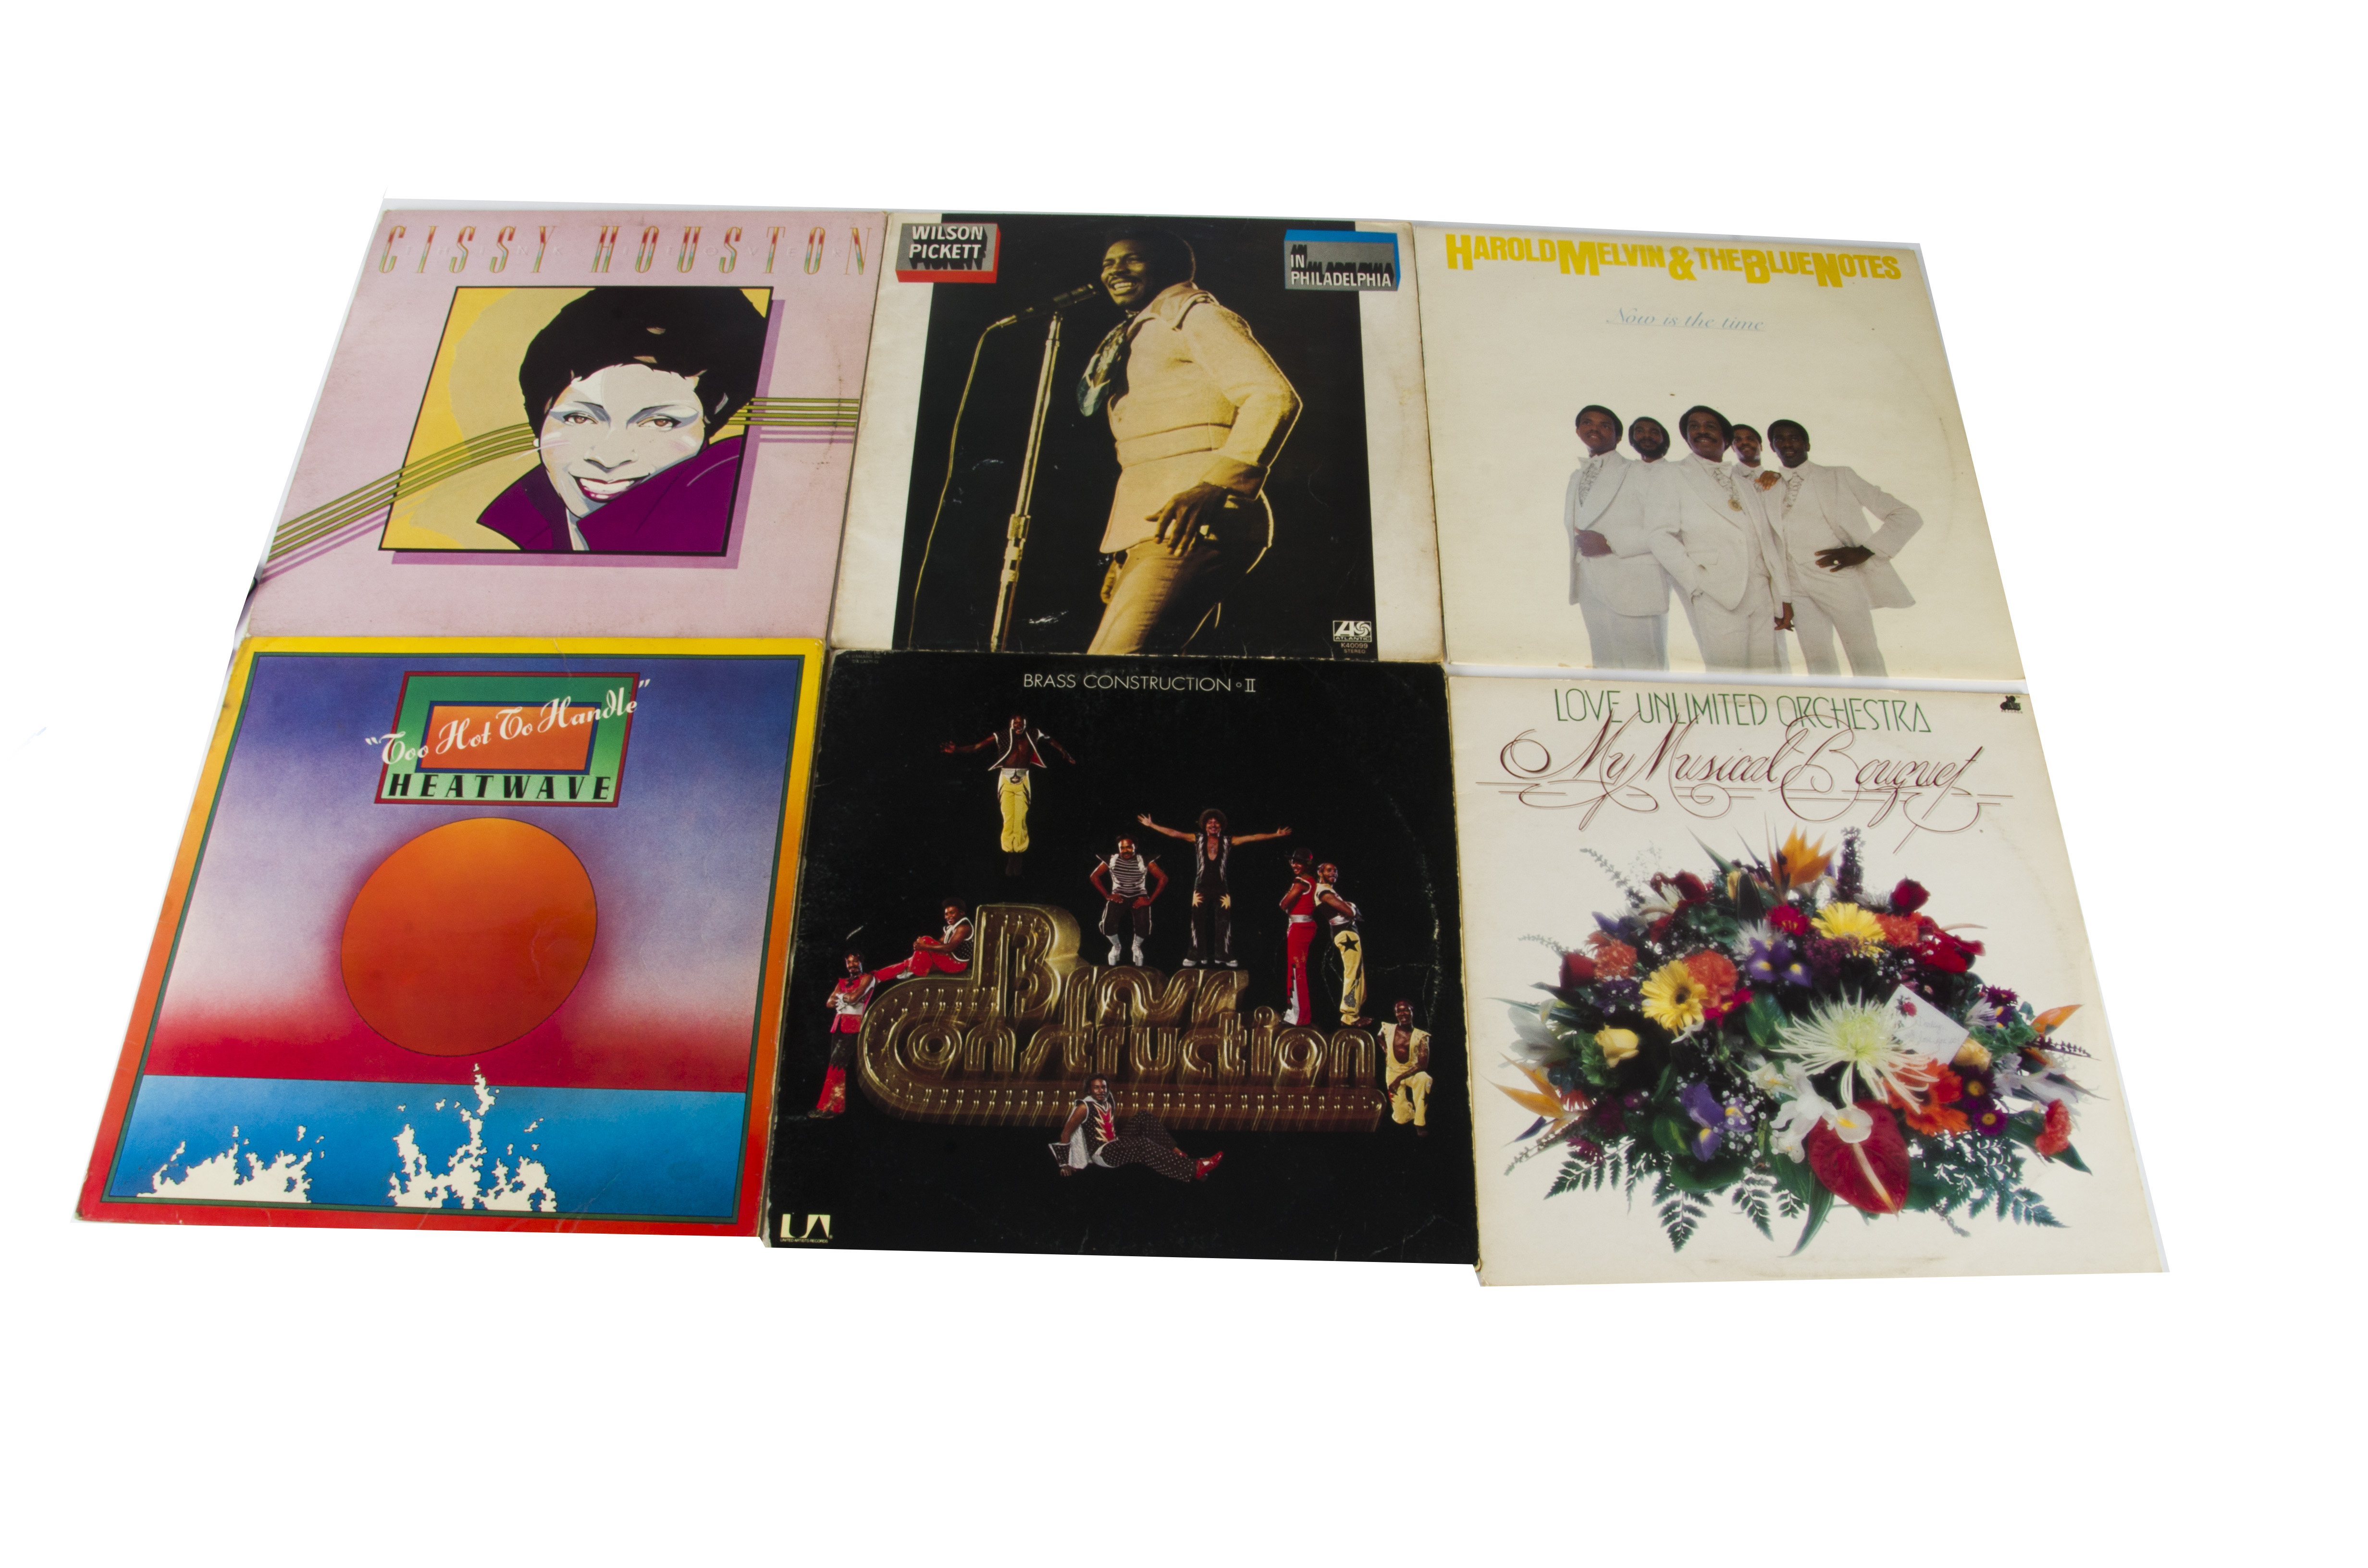 Soul / Funk / Disco LPs, approximately seventy-five albums of mainly Soul, Funk, Motown and Disco